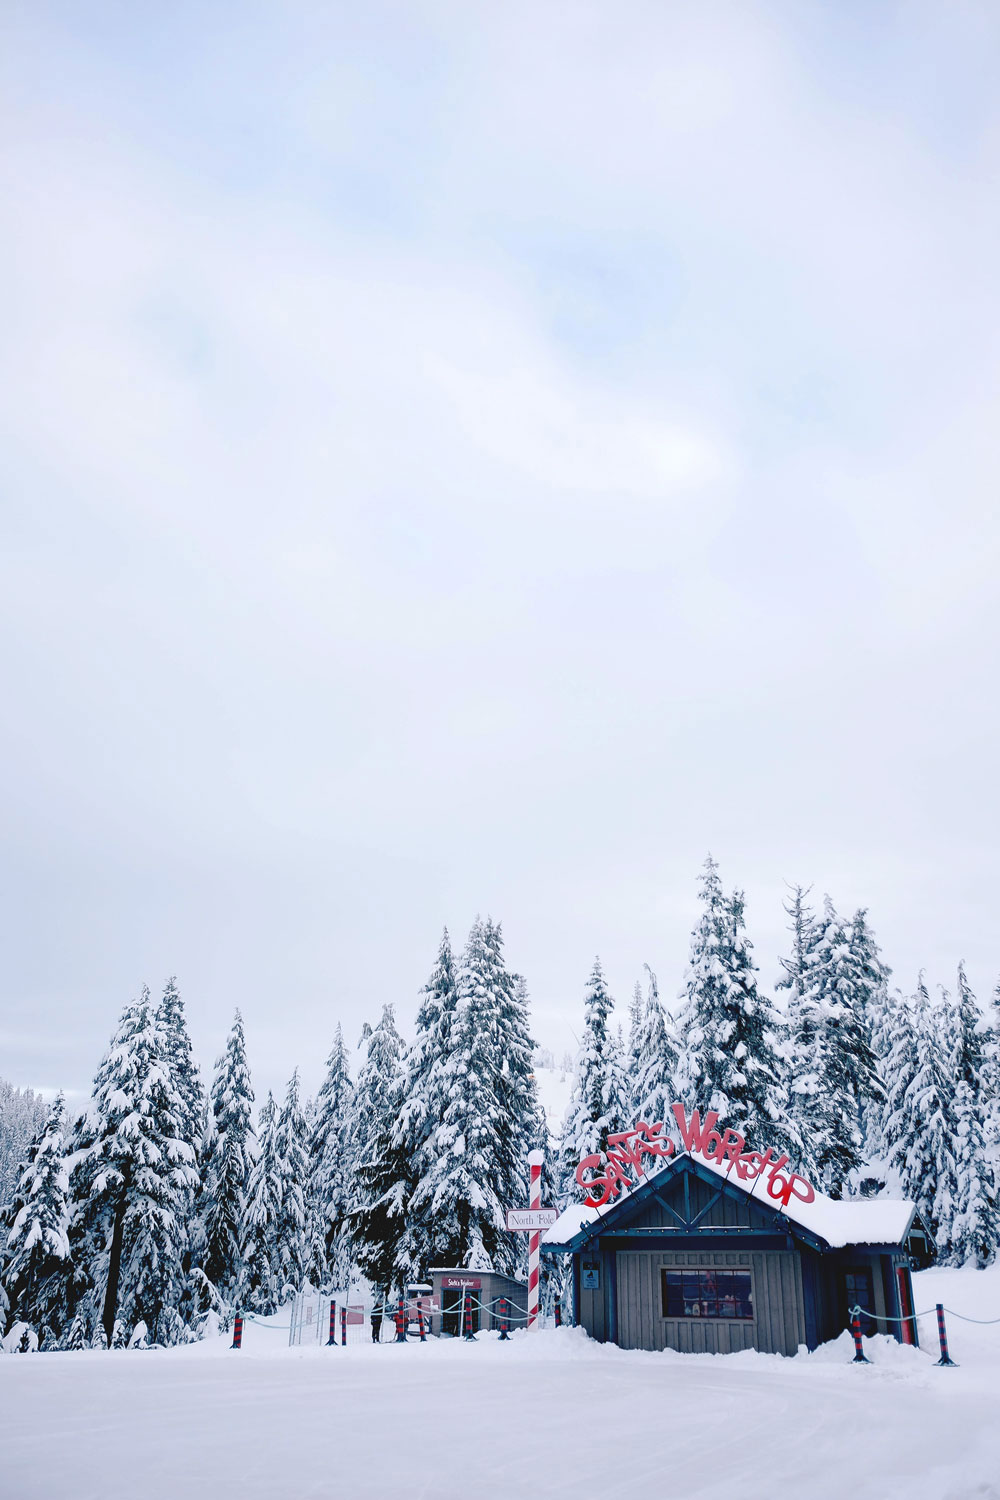 Things to do in Vancouver at Christmas - Grouse Mountain Peak of Christmas ice skating, snowshoeing and skiing